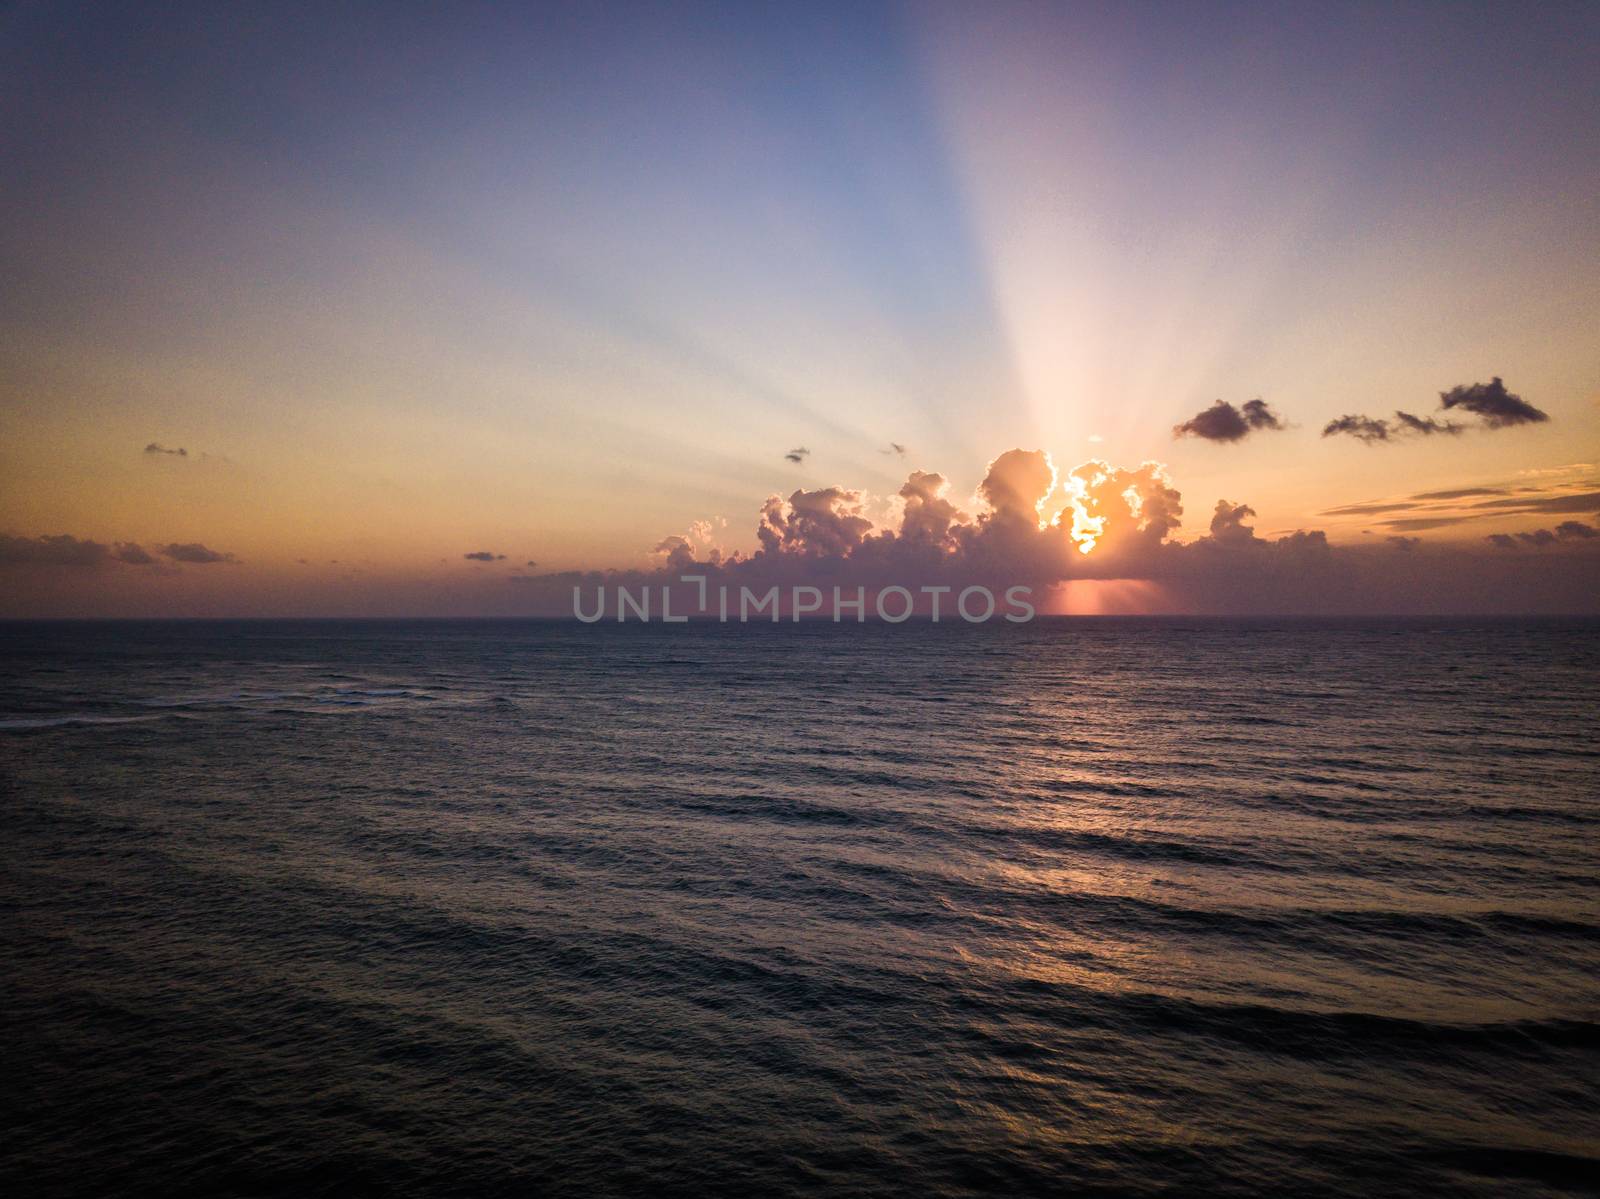 Sunrise of the Indian ocean on the Swahili coast. by Simoneemanphotography